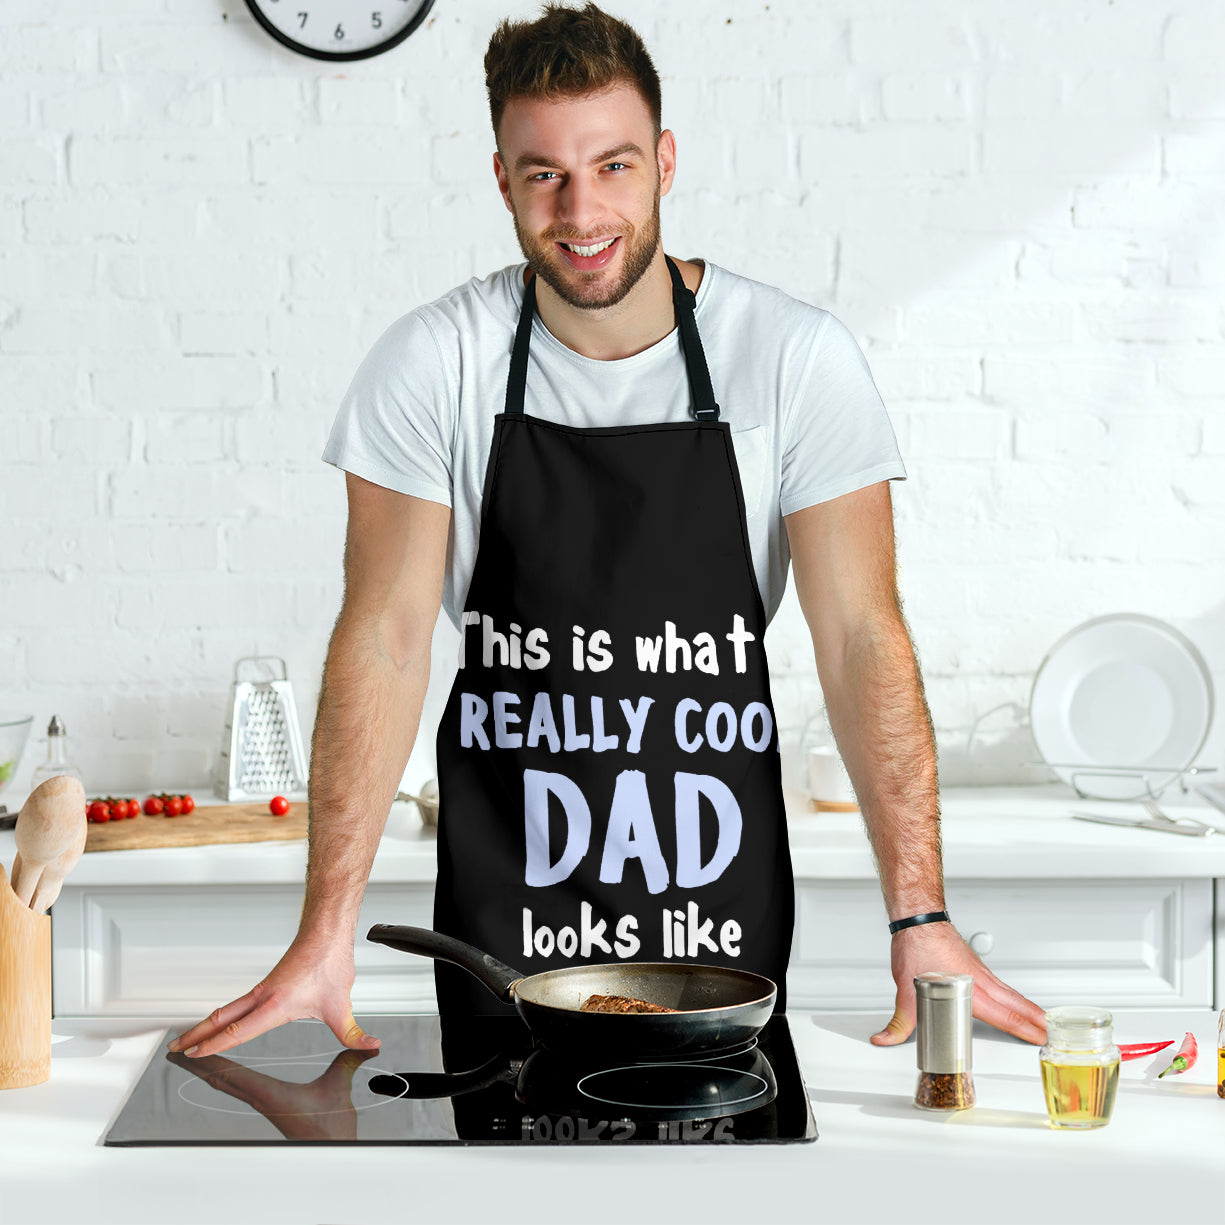 This Is What A Really Cool Dad Look Like Custom Apron Best Gift For Anyone Who Loves Cooking